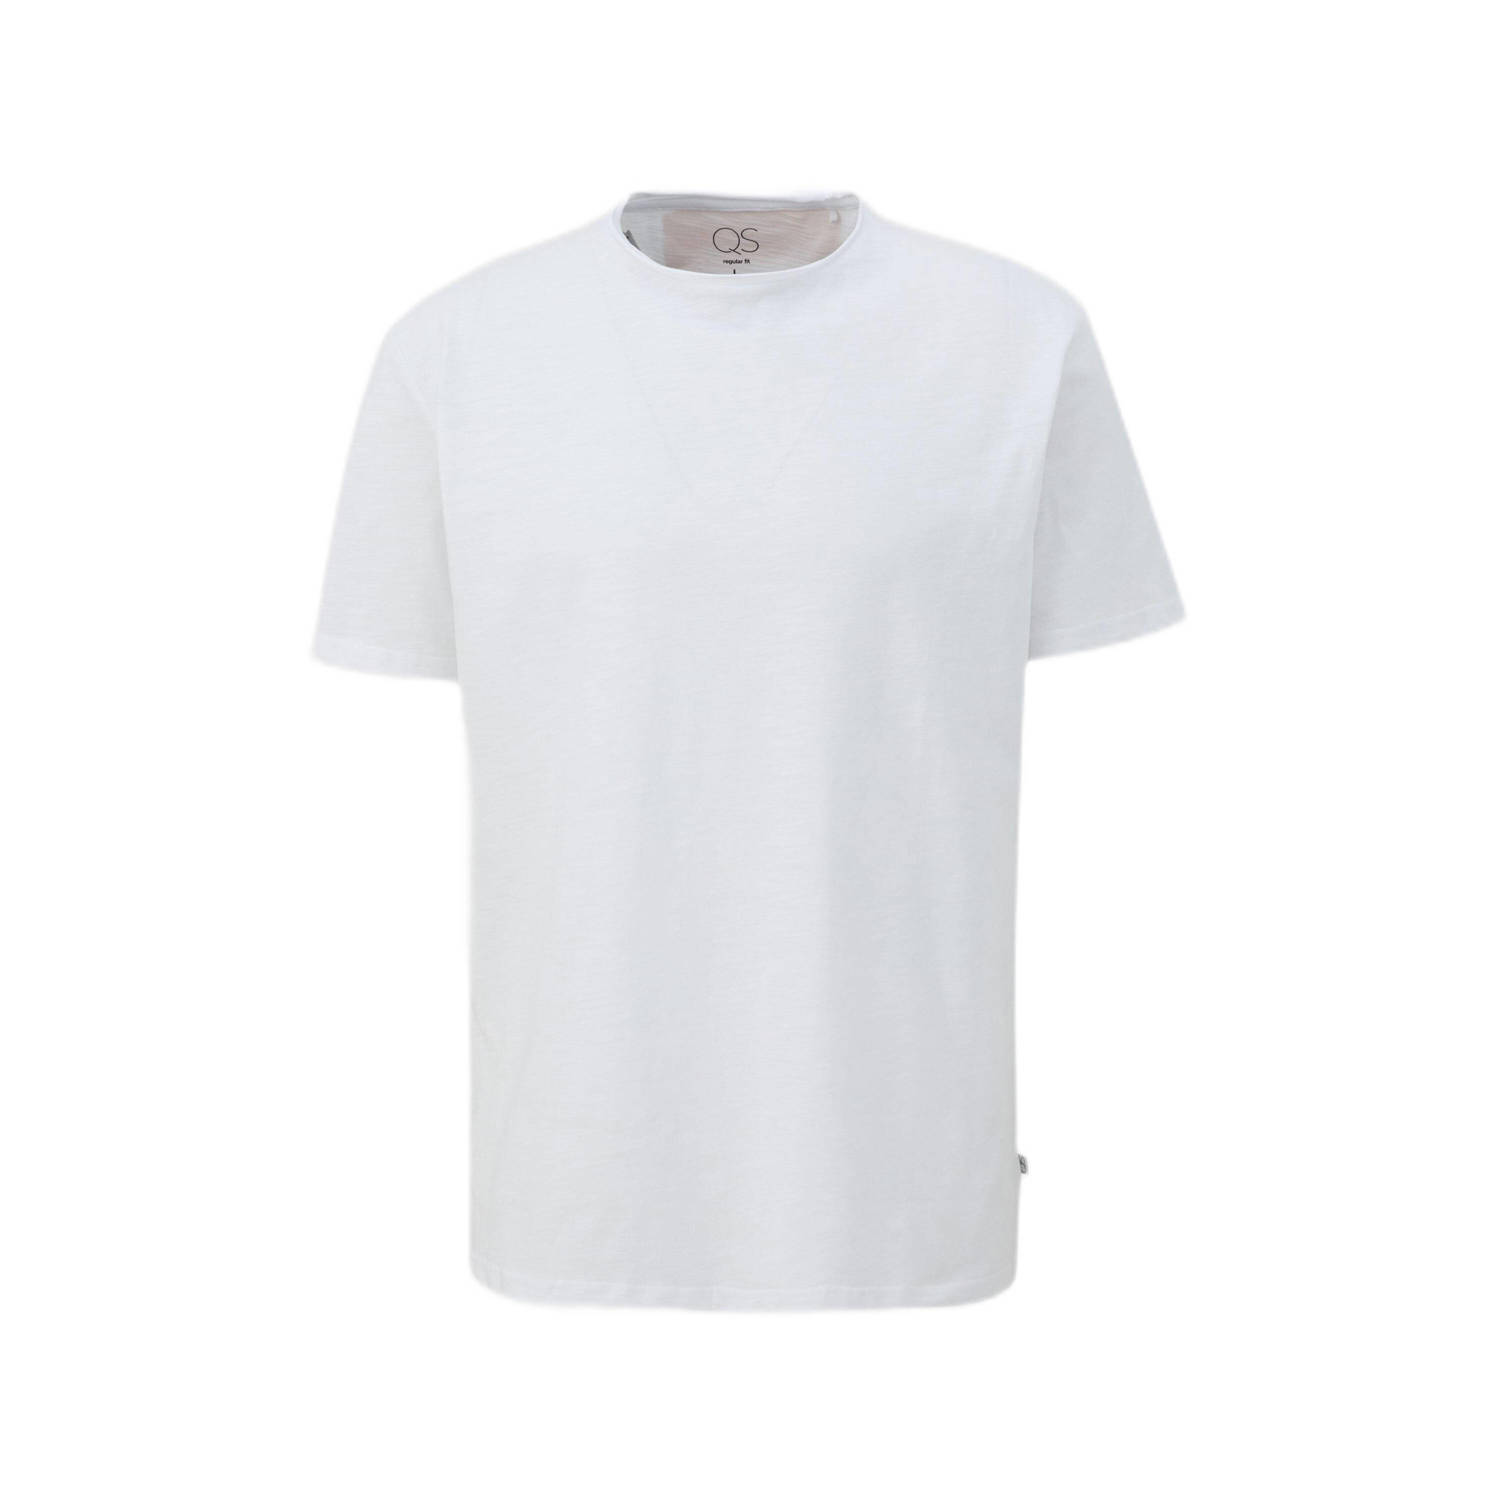 Q S by s.Oliver regular fit T-shirt wit